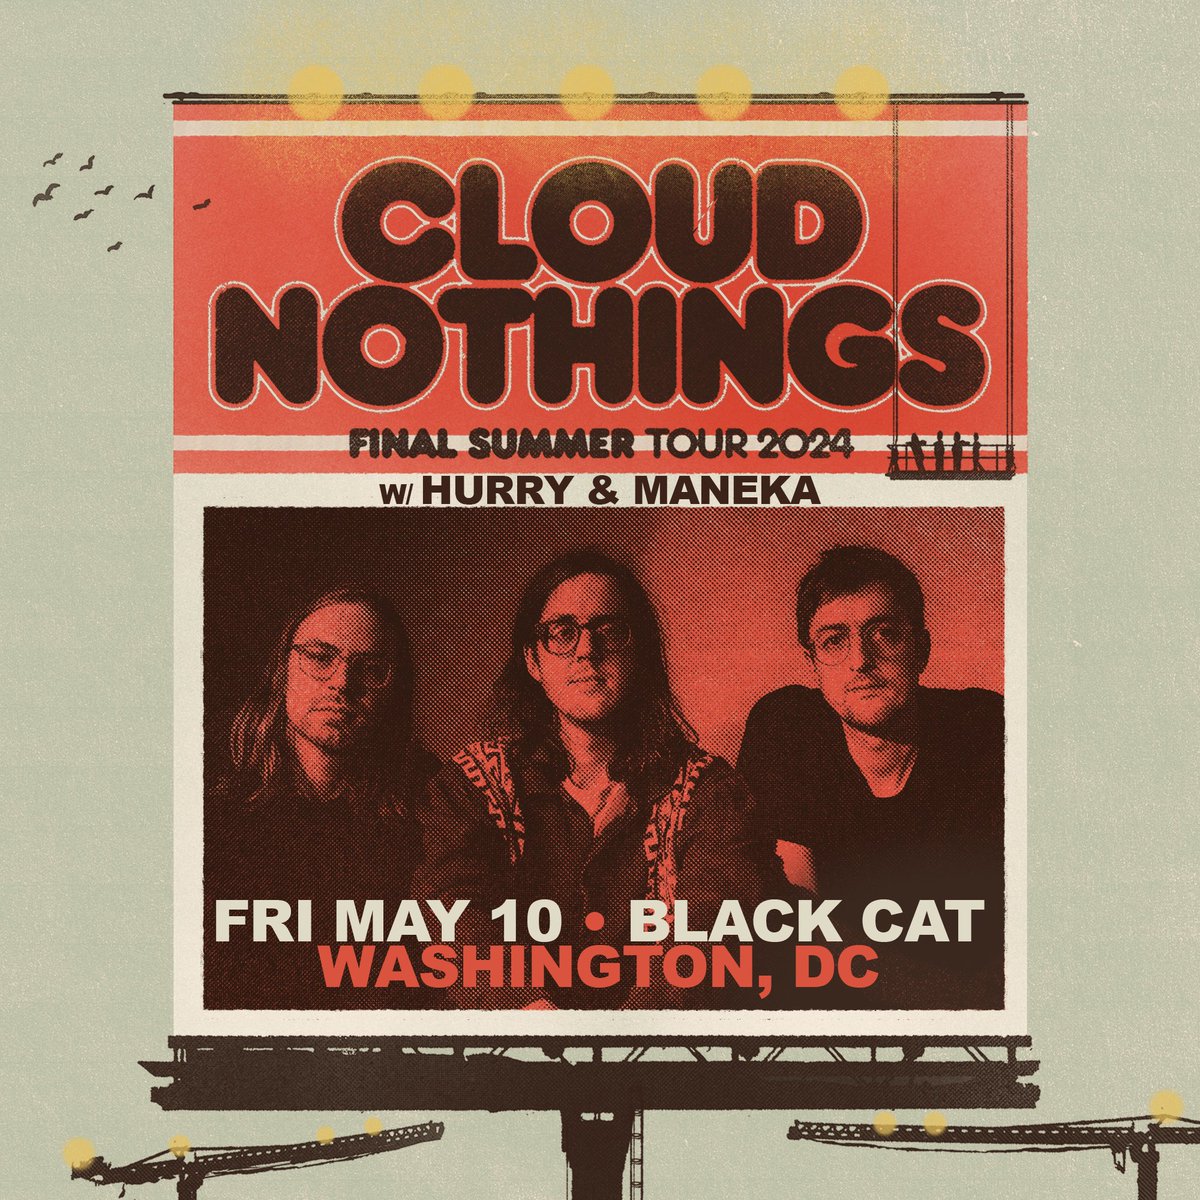 DC we will be at the @BlackCatDC opening for @cloudnothings and @hurryband ! I’ll have my most Maryland/DC band yet w @obey_dog and @jordynblakely and Damien who is not from the dmv but is still cool